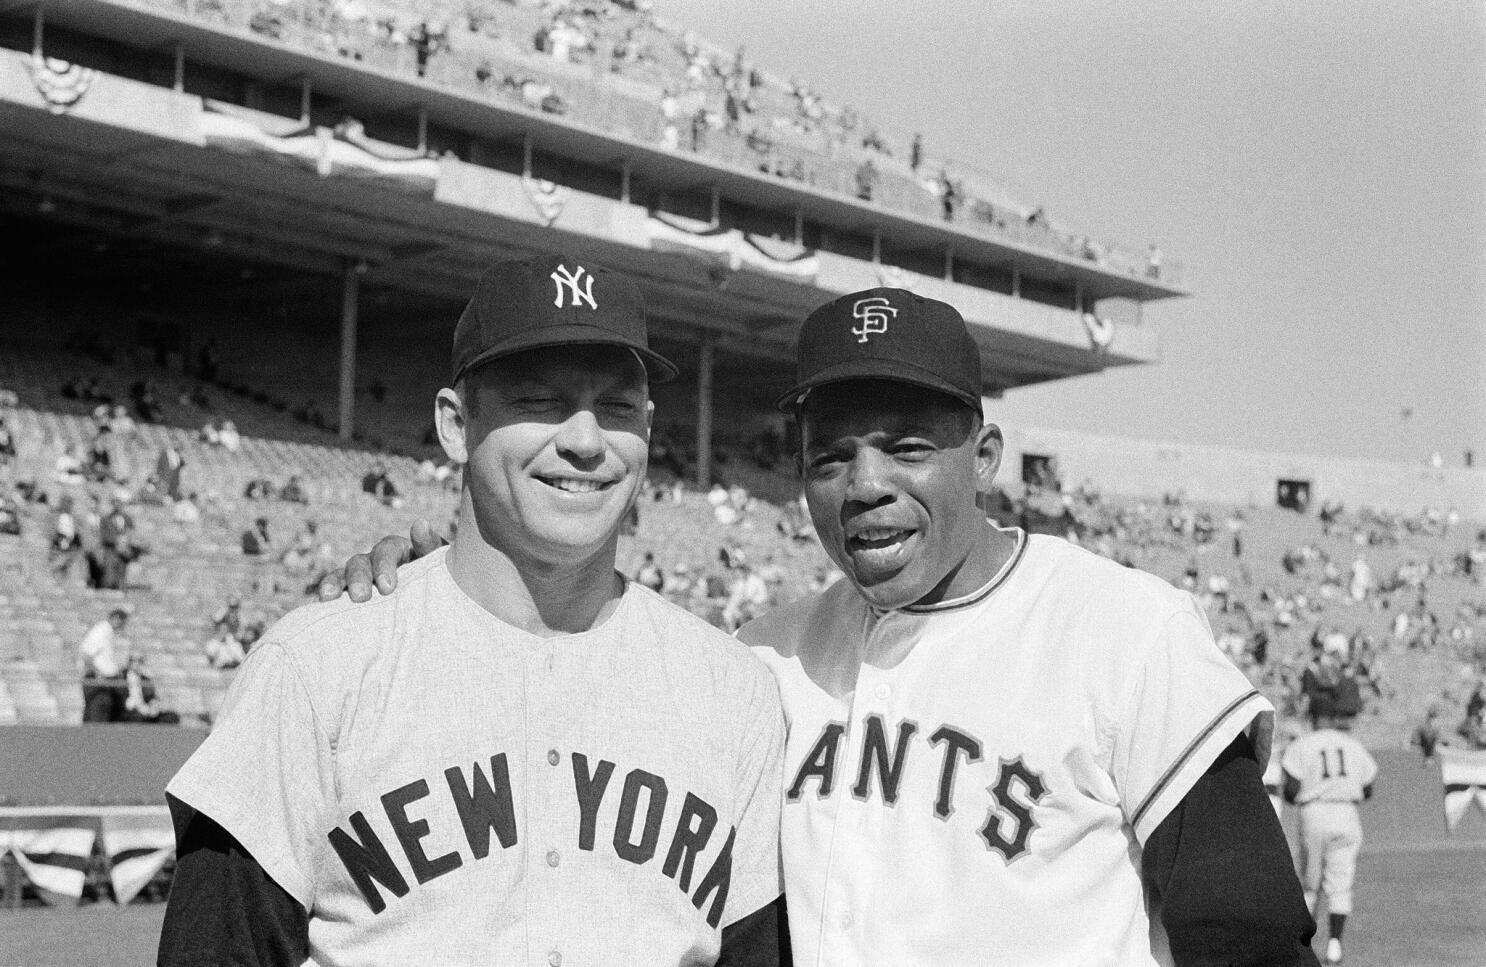 Bill Dwyre: Peter Ueberroth recalls reinstating Mickey Mantle and